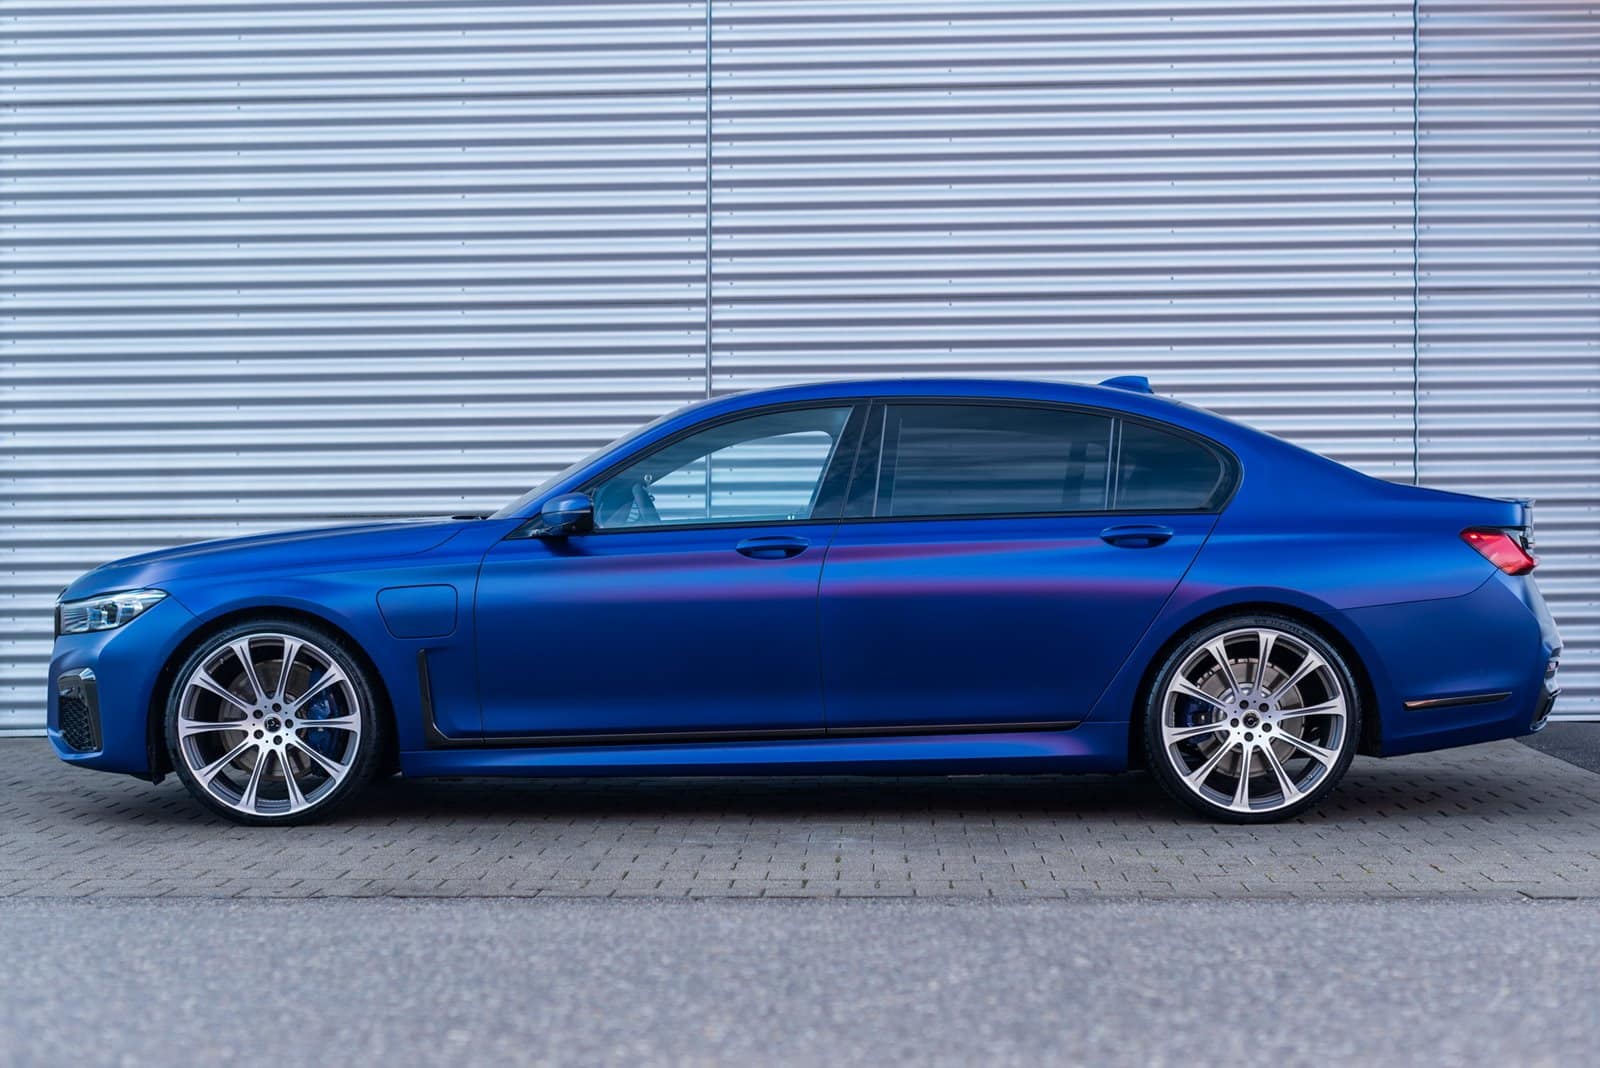 This BMW 745Le xDrive laughs at the very same BMW M3 Competition 2021